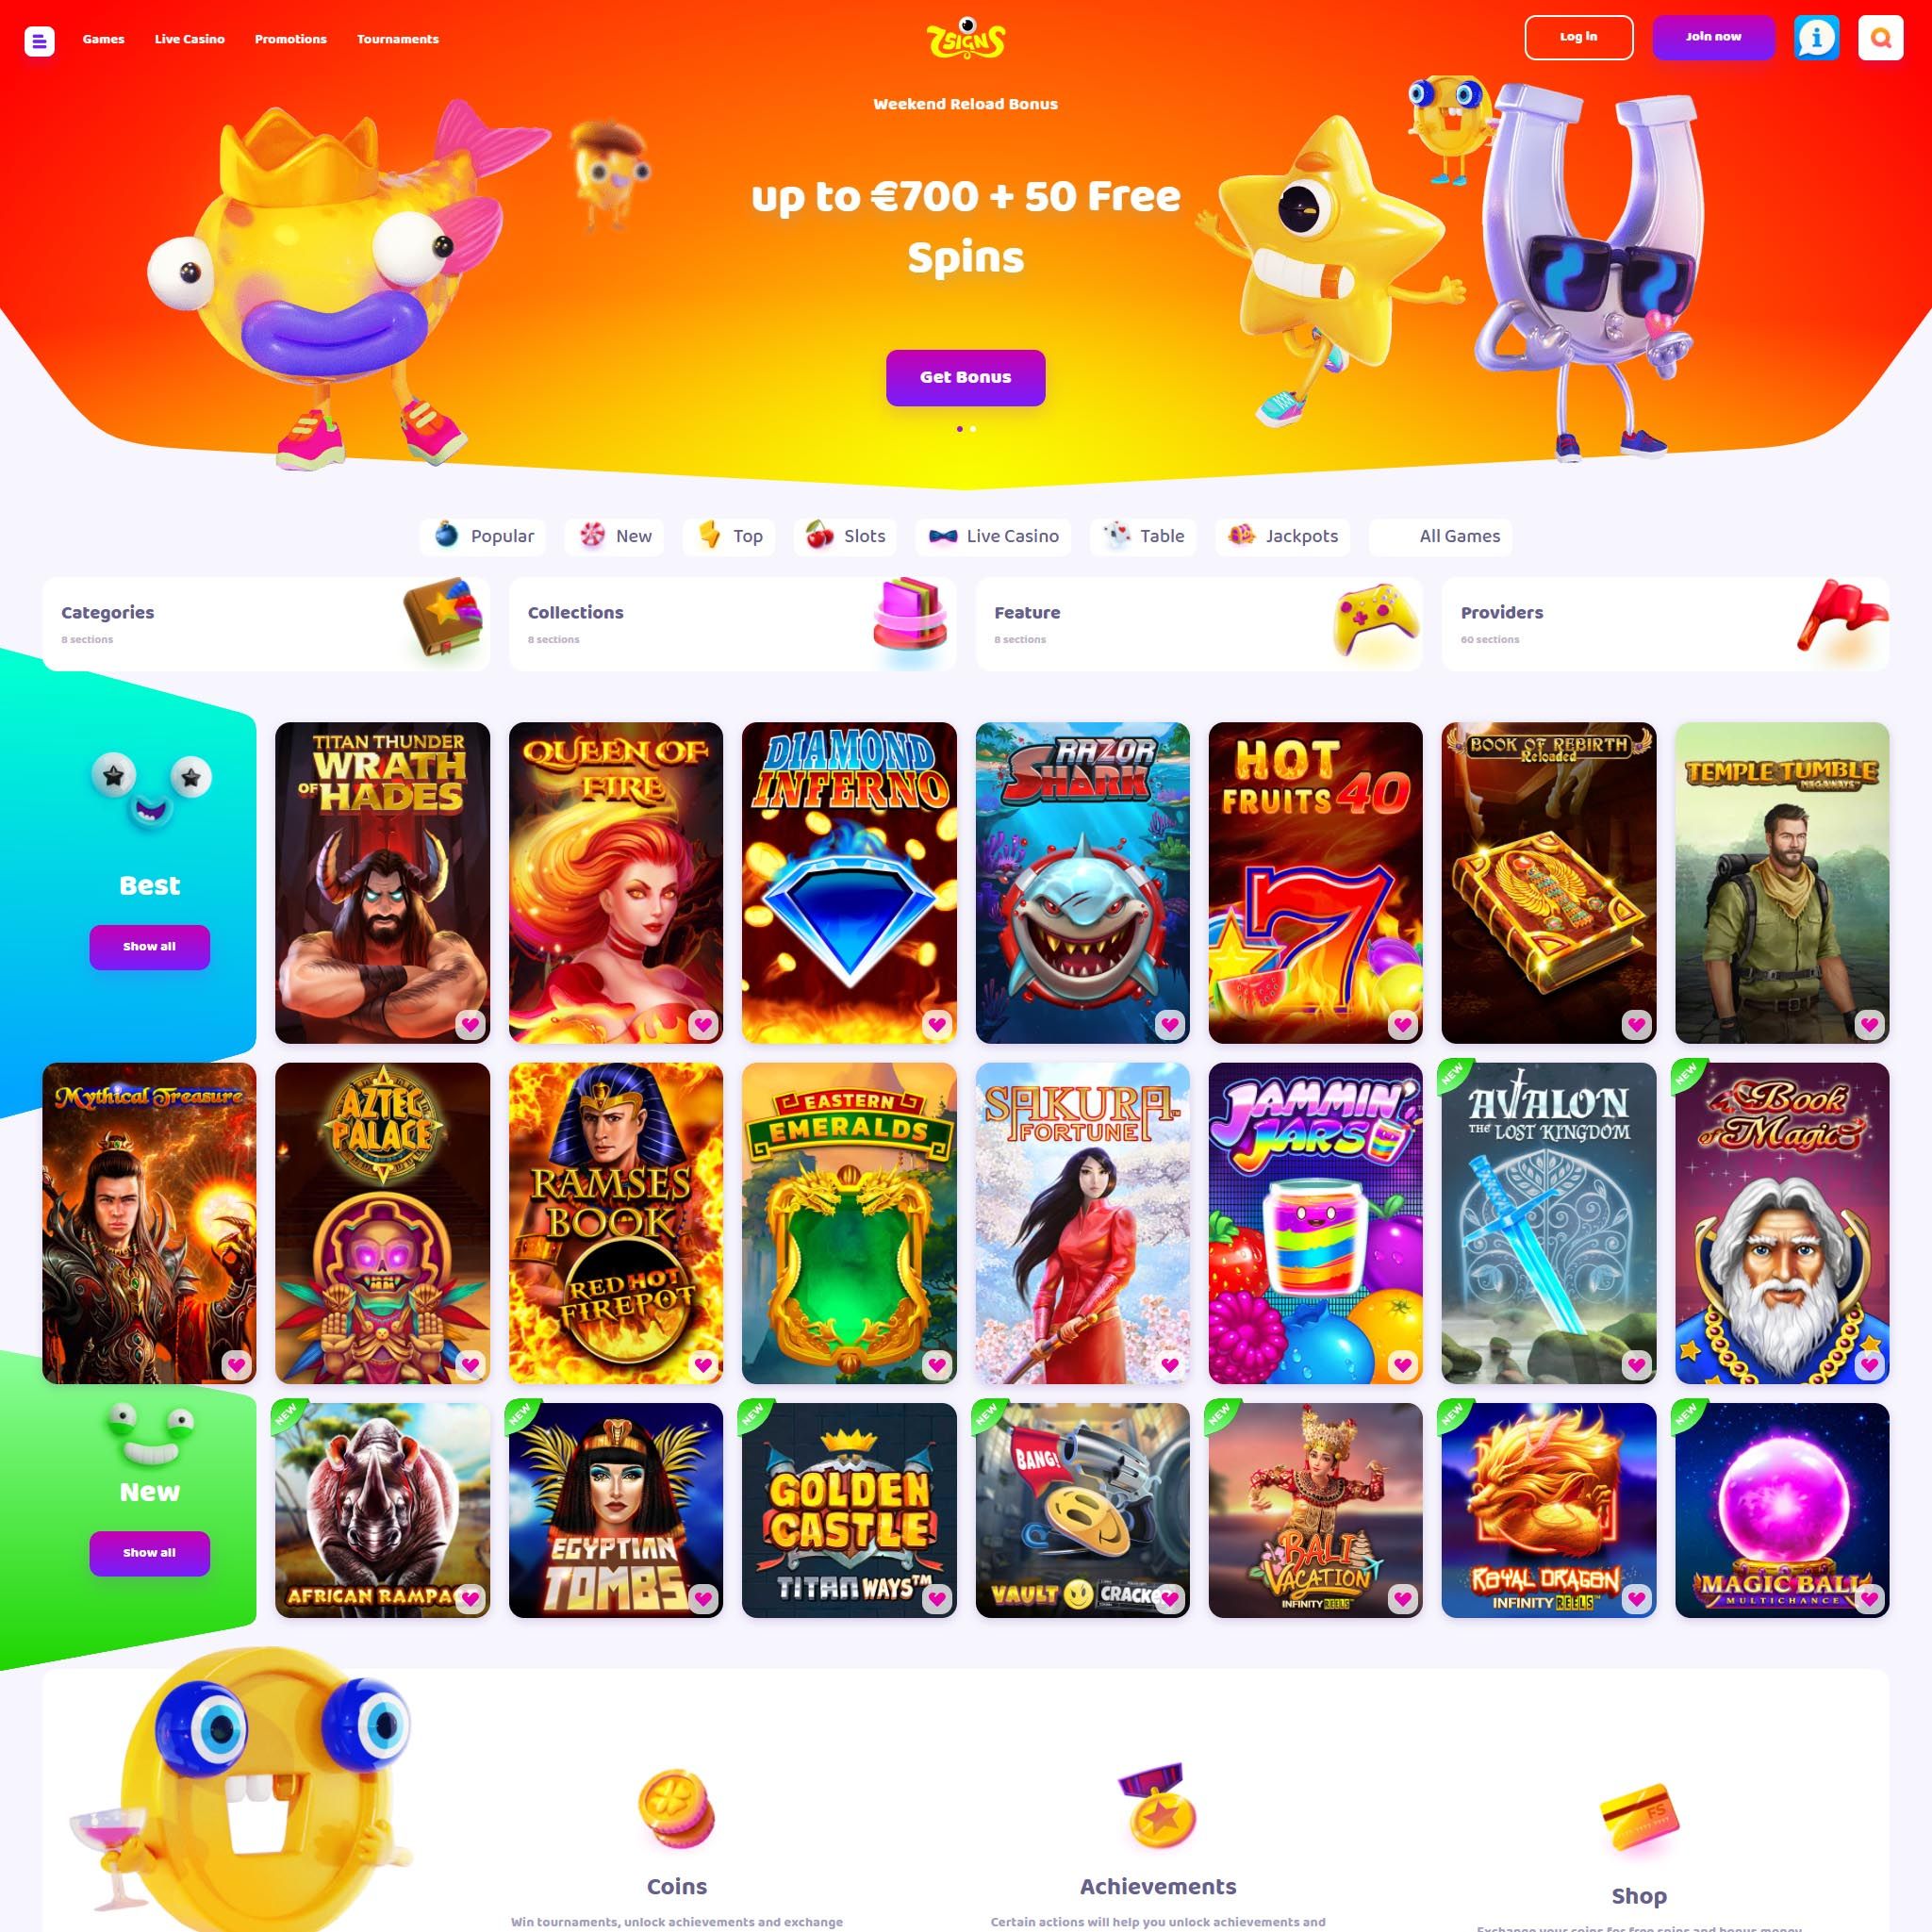 7Signs Casino review